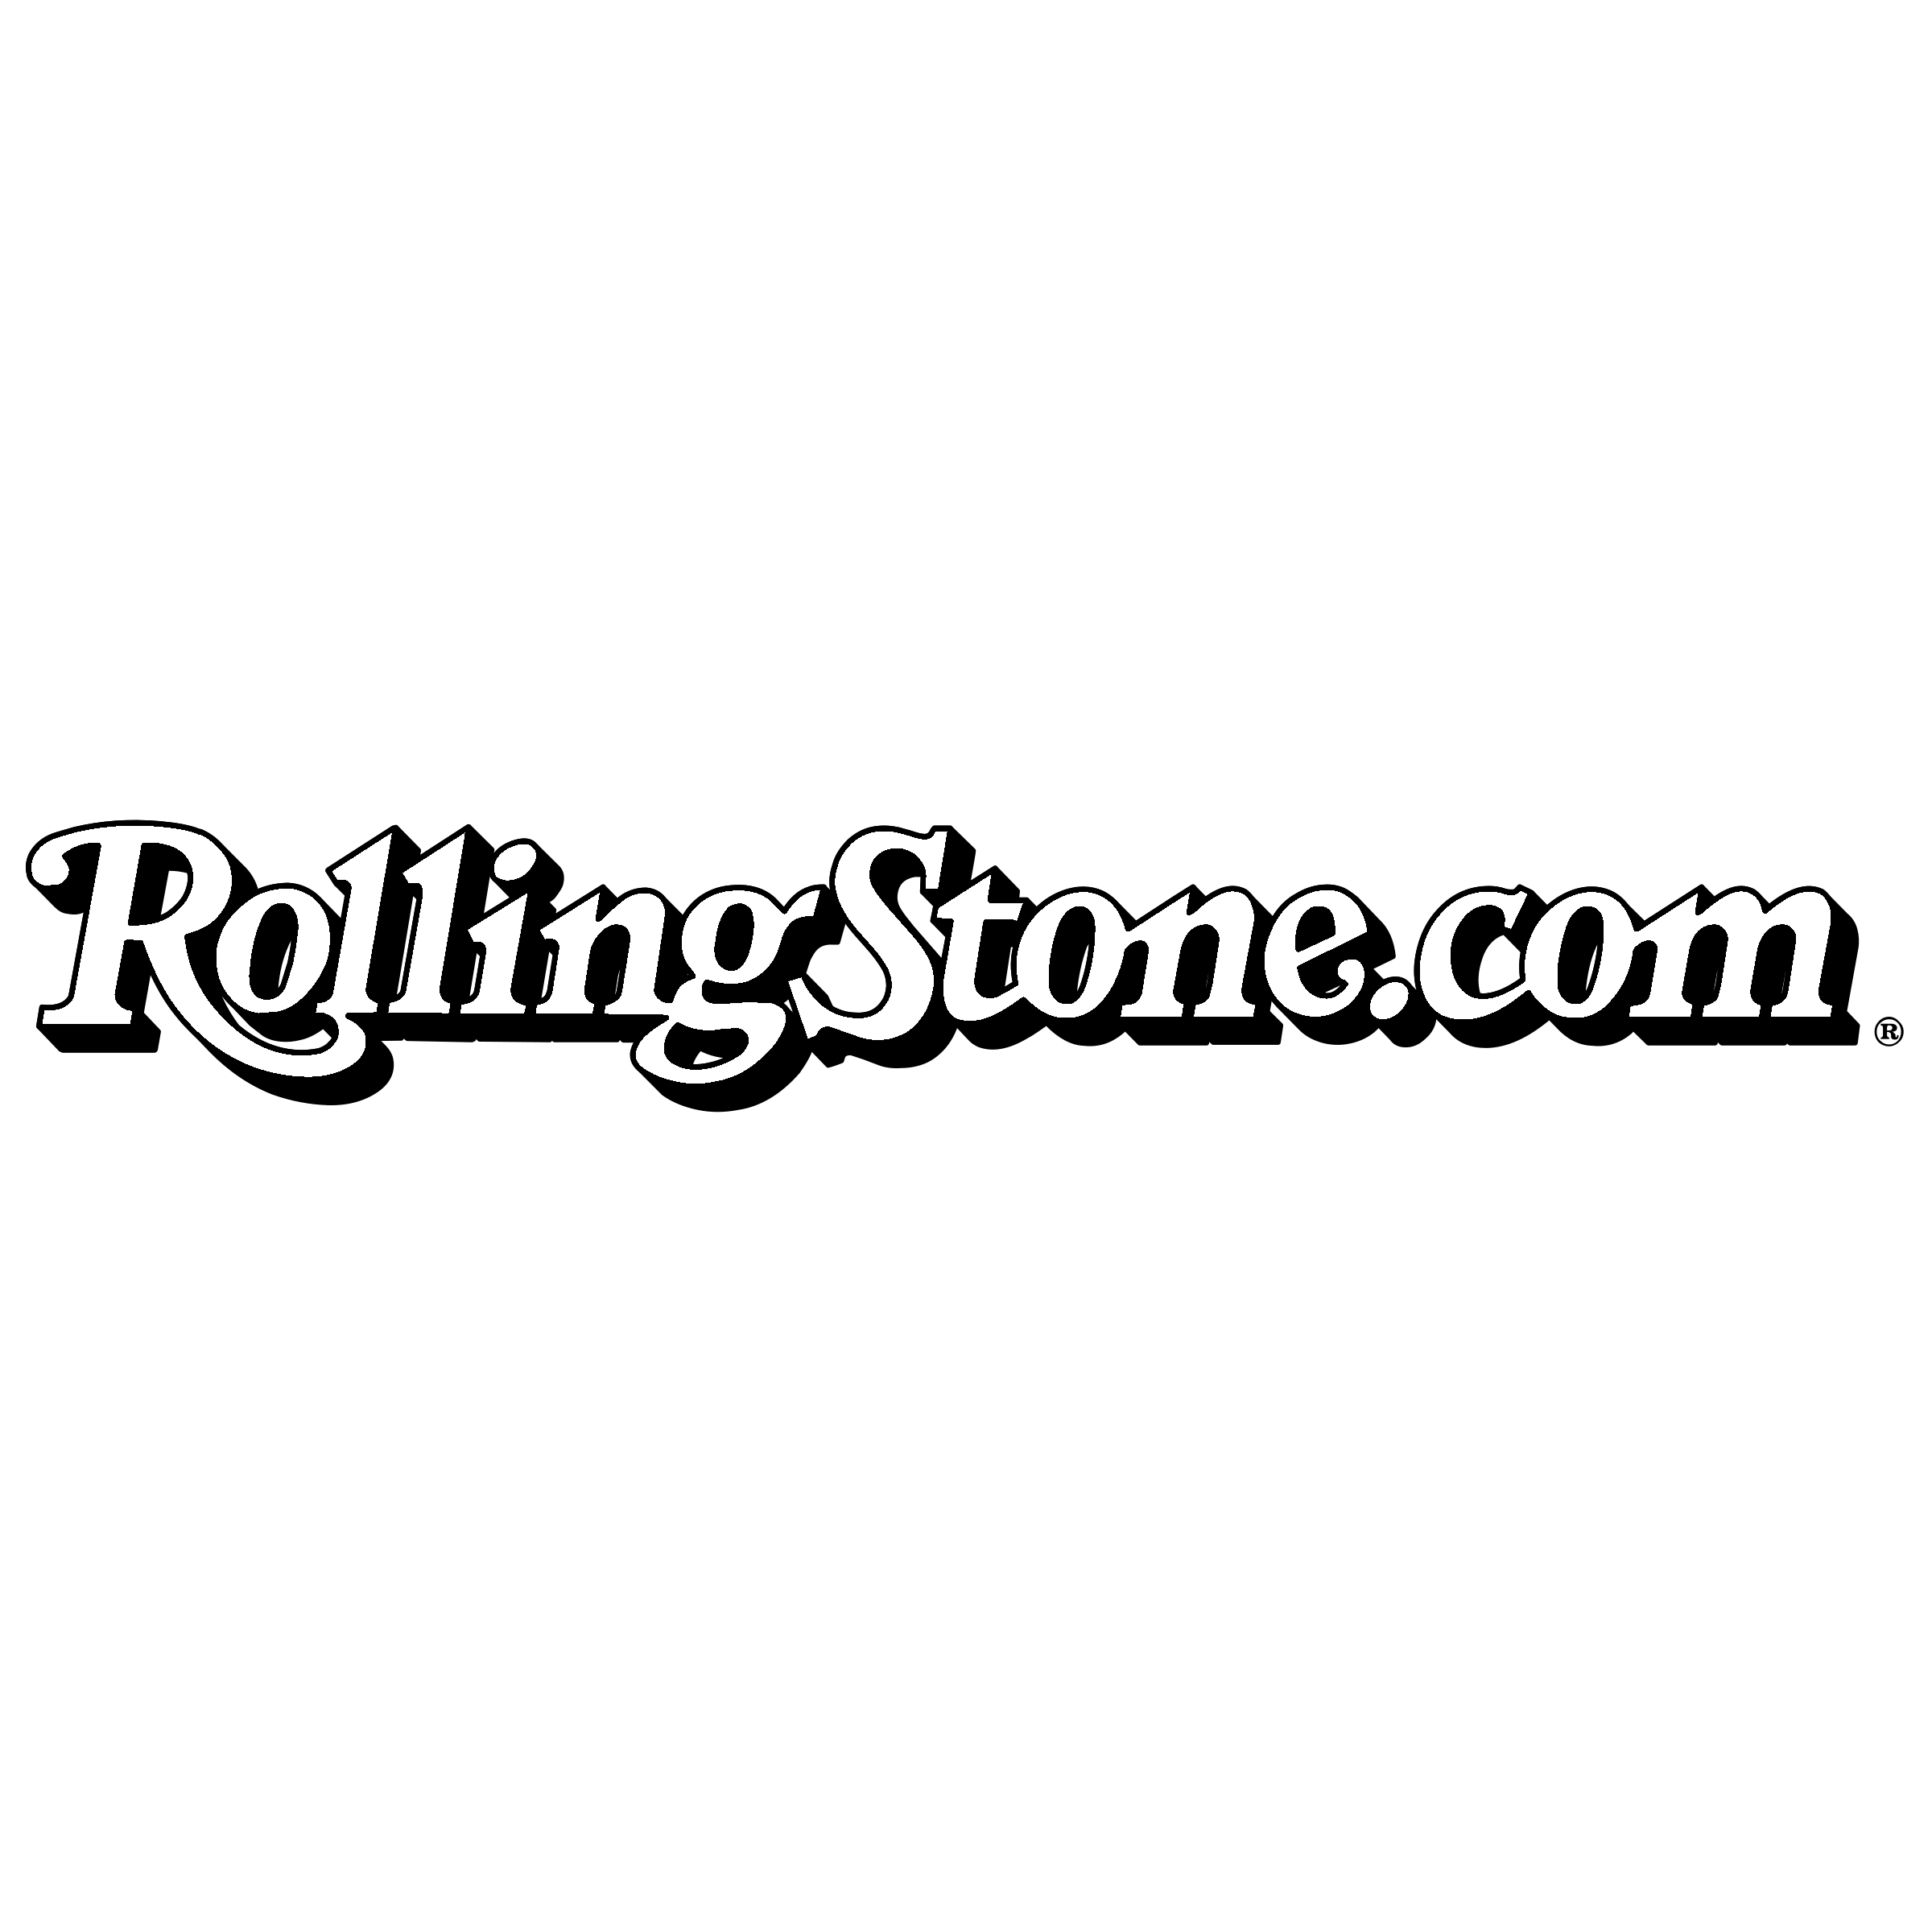 rollingstone-com-logo-black-and-white.png